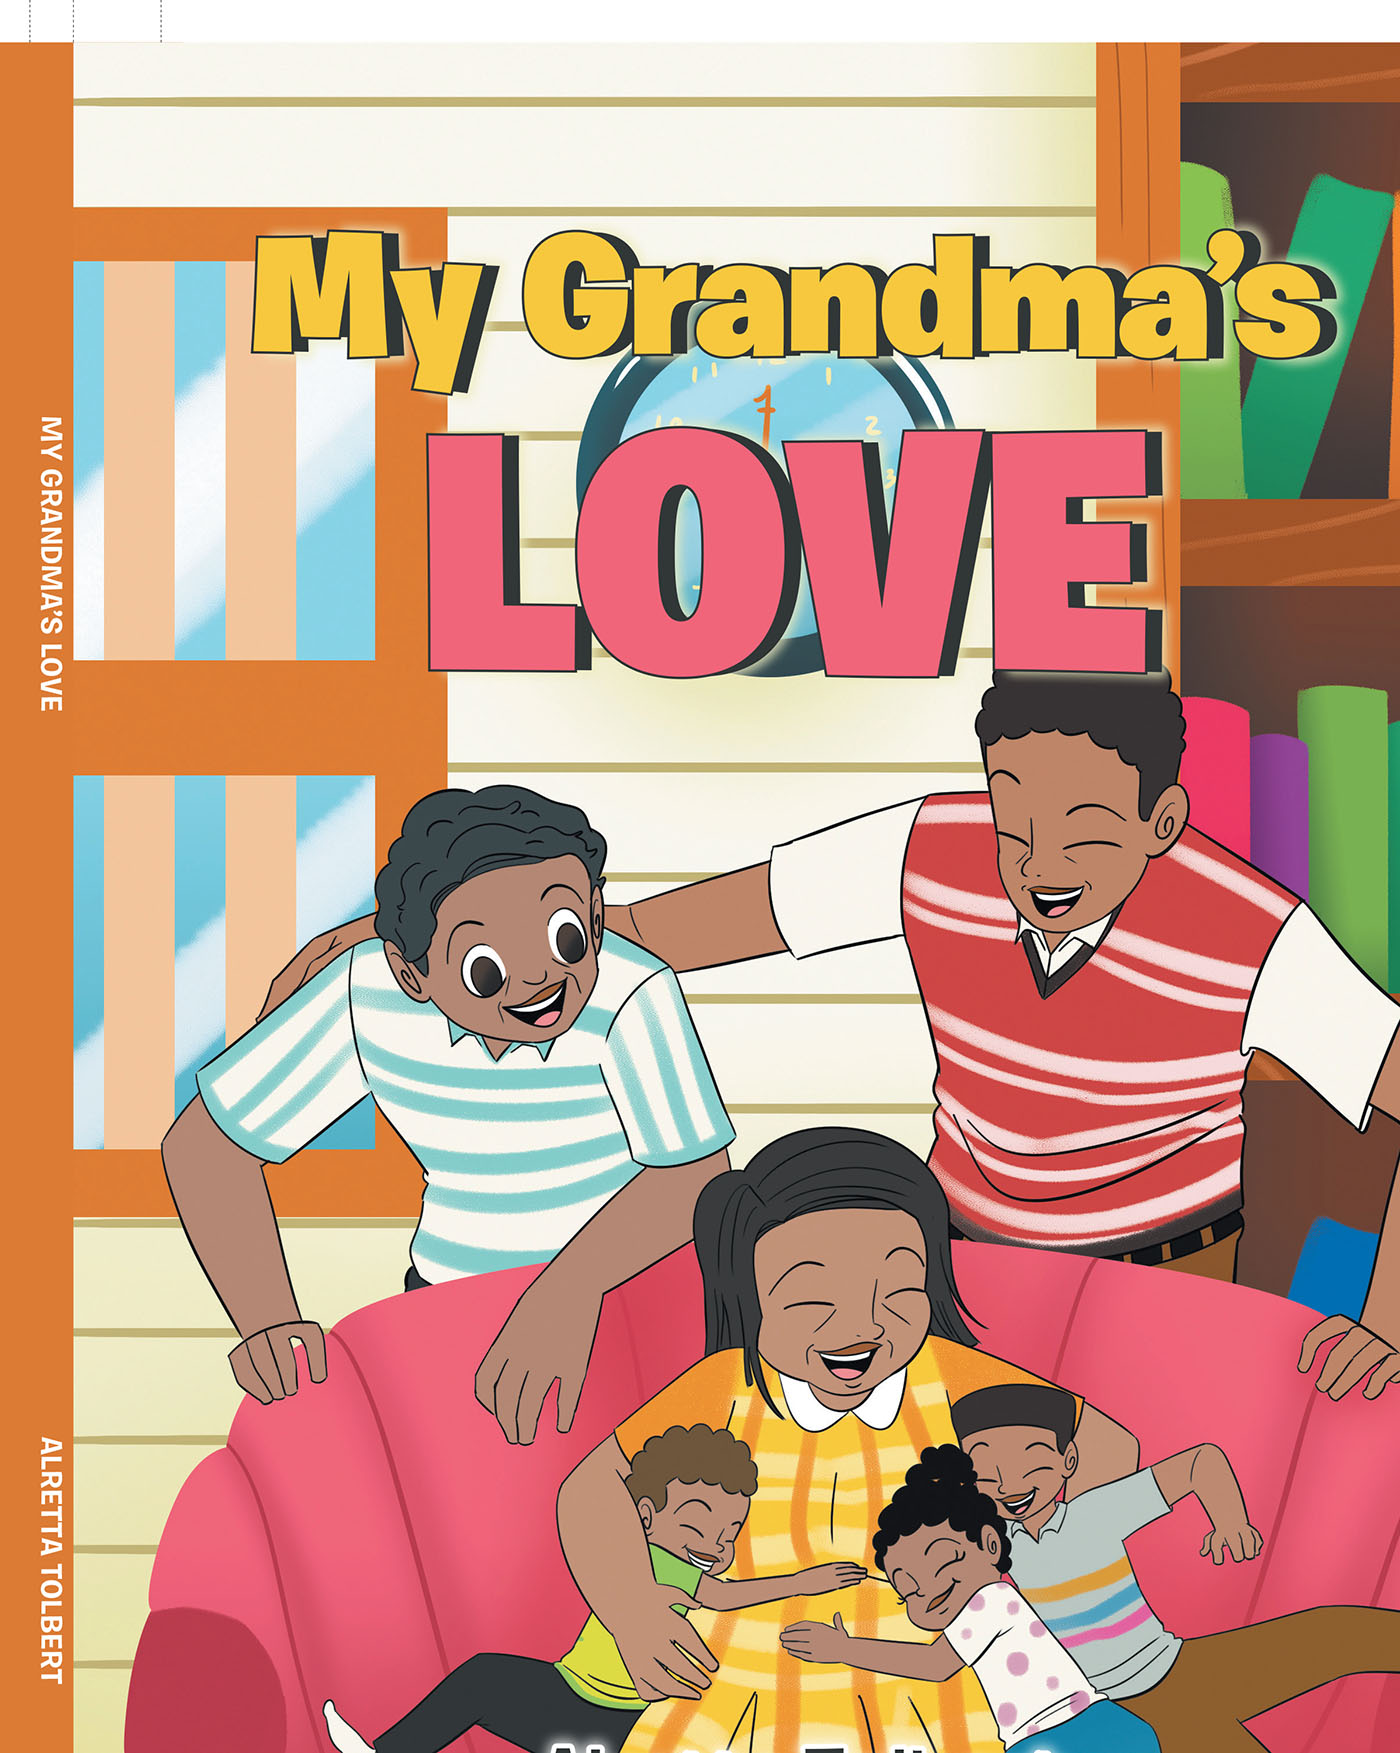 Alretta Tolbert’s Newly Released "My Grandma’s Love" is a Charming Children’s Work That Explores the Importance of Love in a Creative Fashion